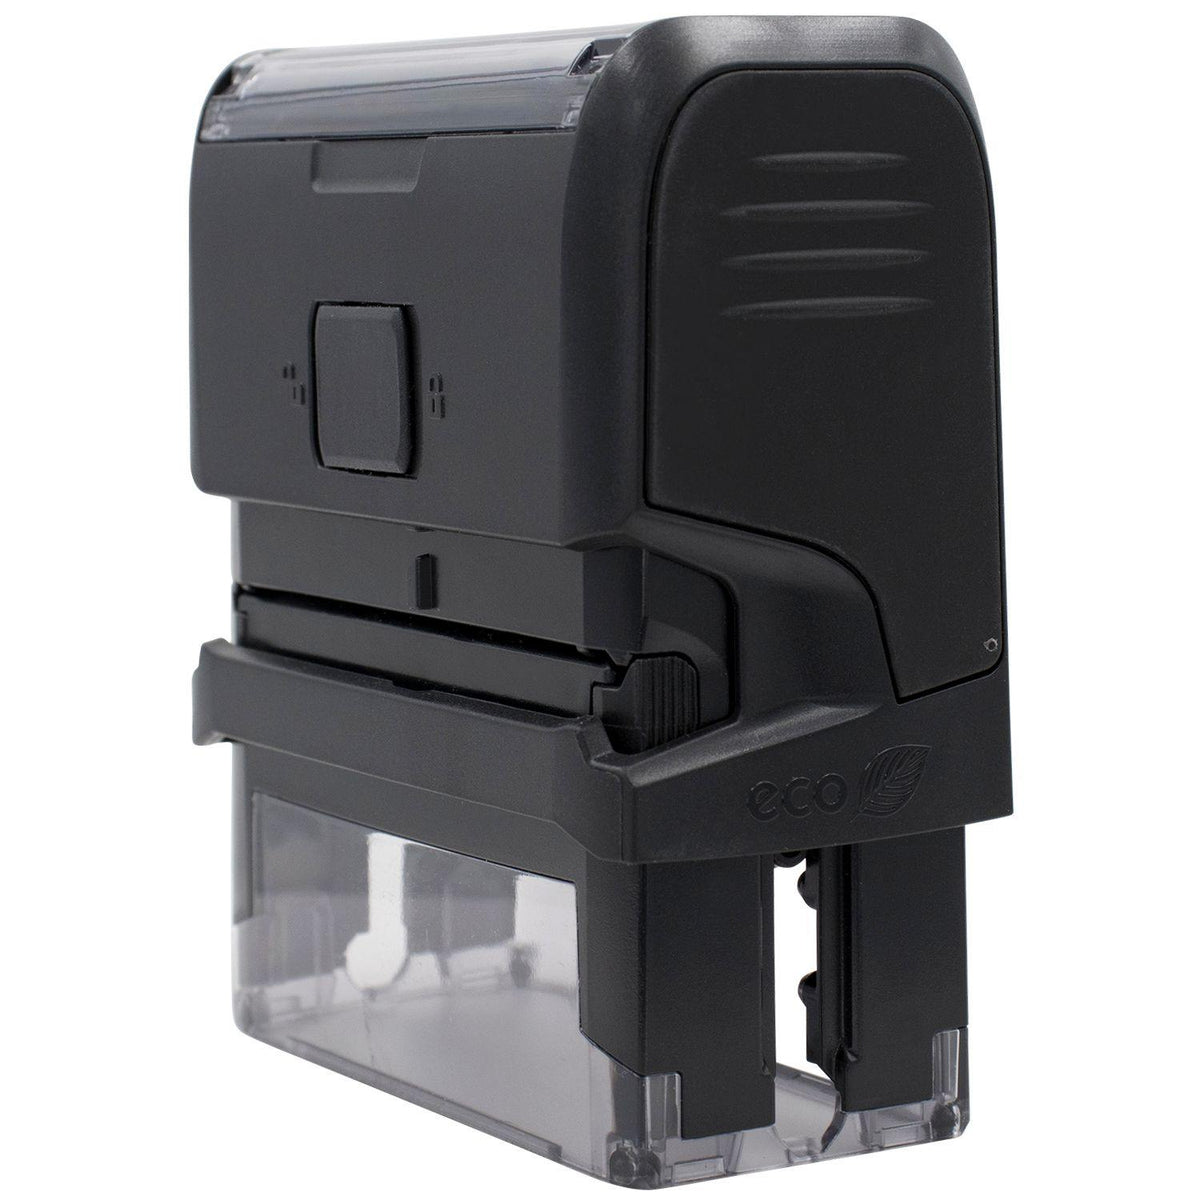 Self Inking Coumadin Patient Stamp - Engineer Seal Stamps - Brand_Trodat, Impression Size_Small, Stamp Type_Self-Inking Stamp, Type of Use_Medical Office